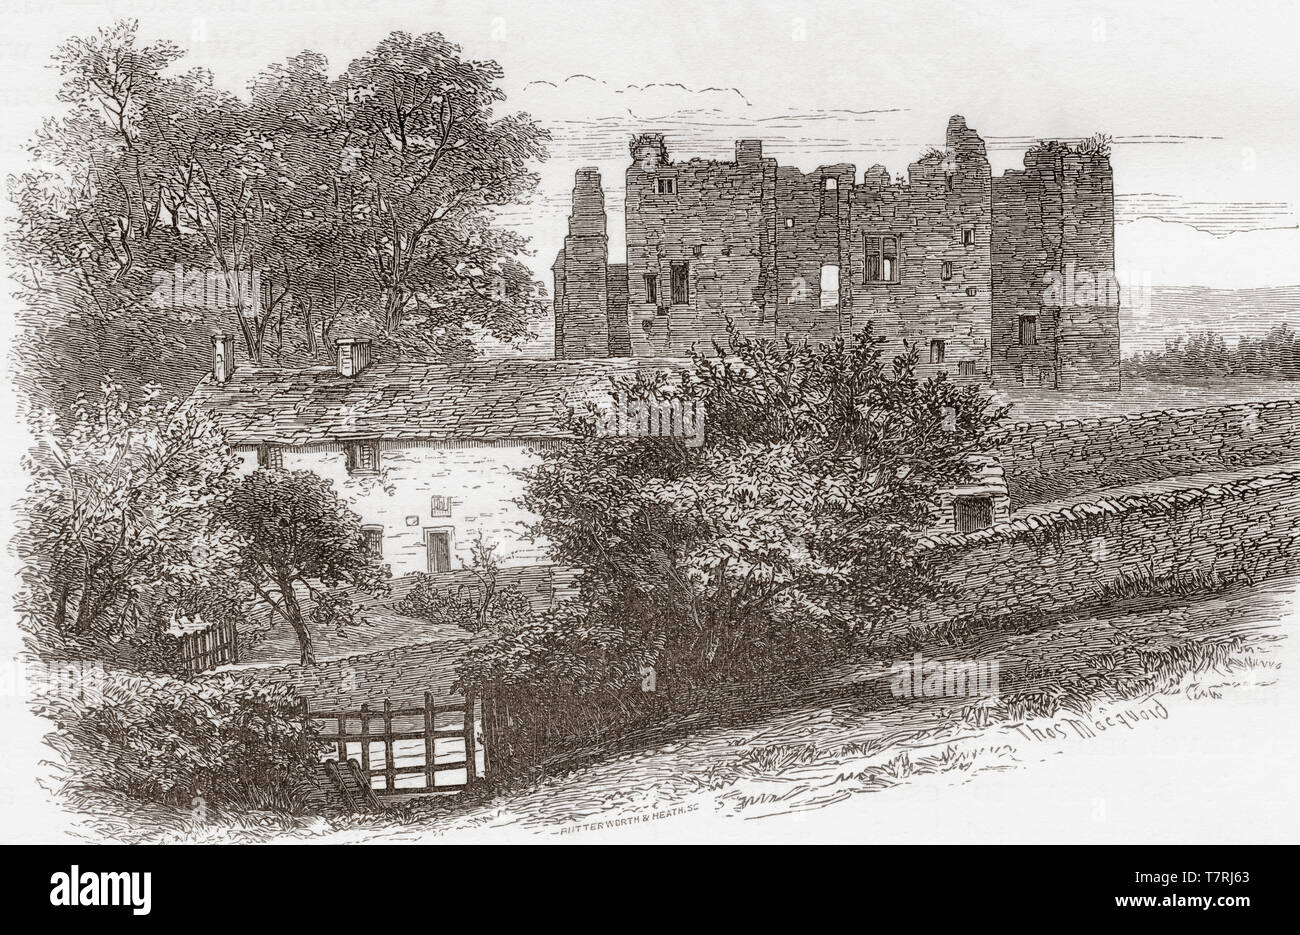 The Barden Tower, near Bolton, Yorkshire, England, seen here in the 19th century.  Constructed in the 15th century by Henry Clifford.  From English Pictures, published 1890. Stock Photo